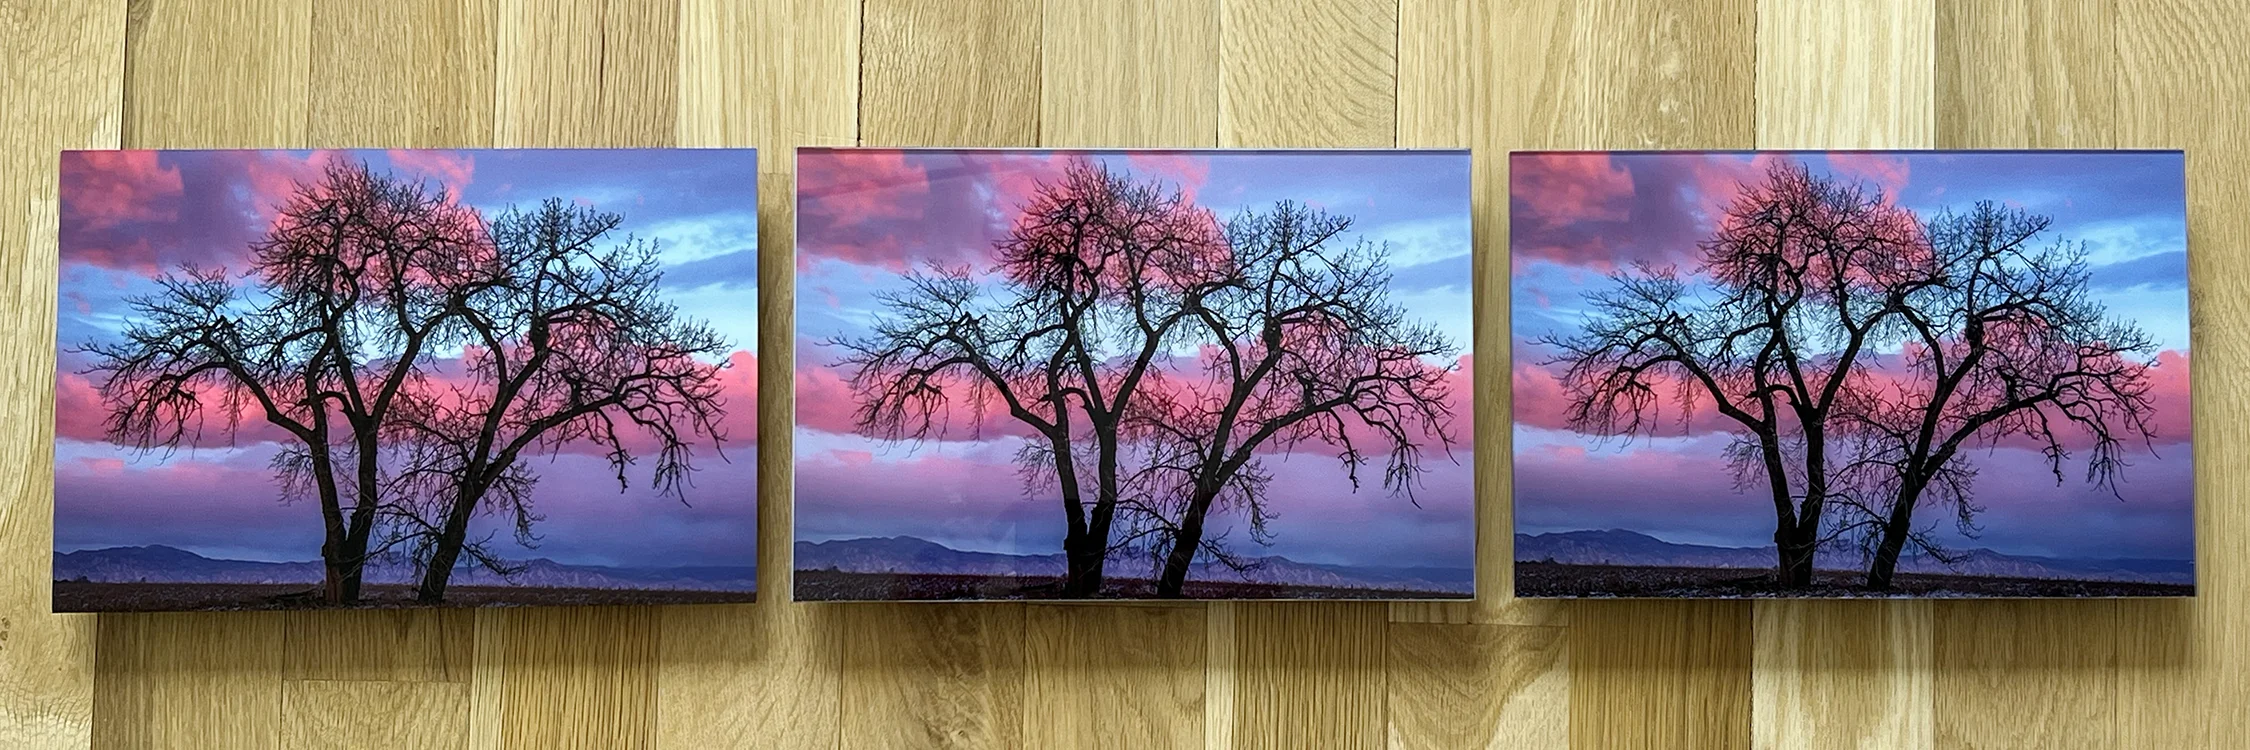 Three prints side by side - metal, acrylic, and TrueLife acrylic - Gintchin Fine Art